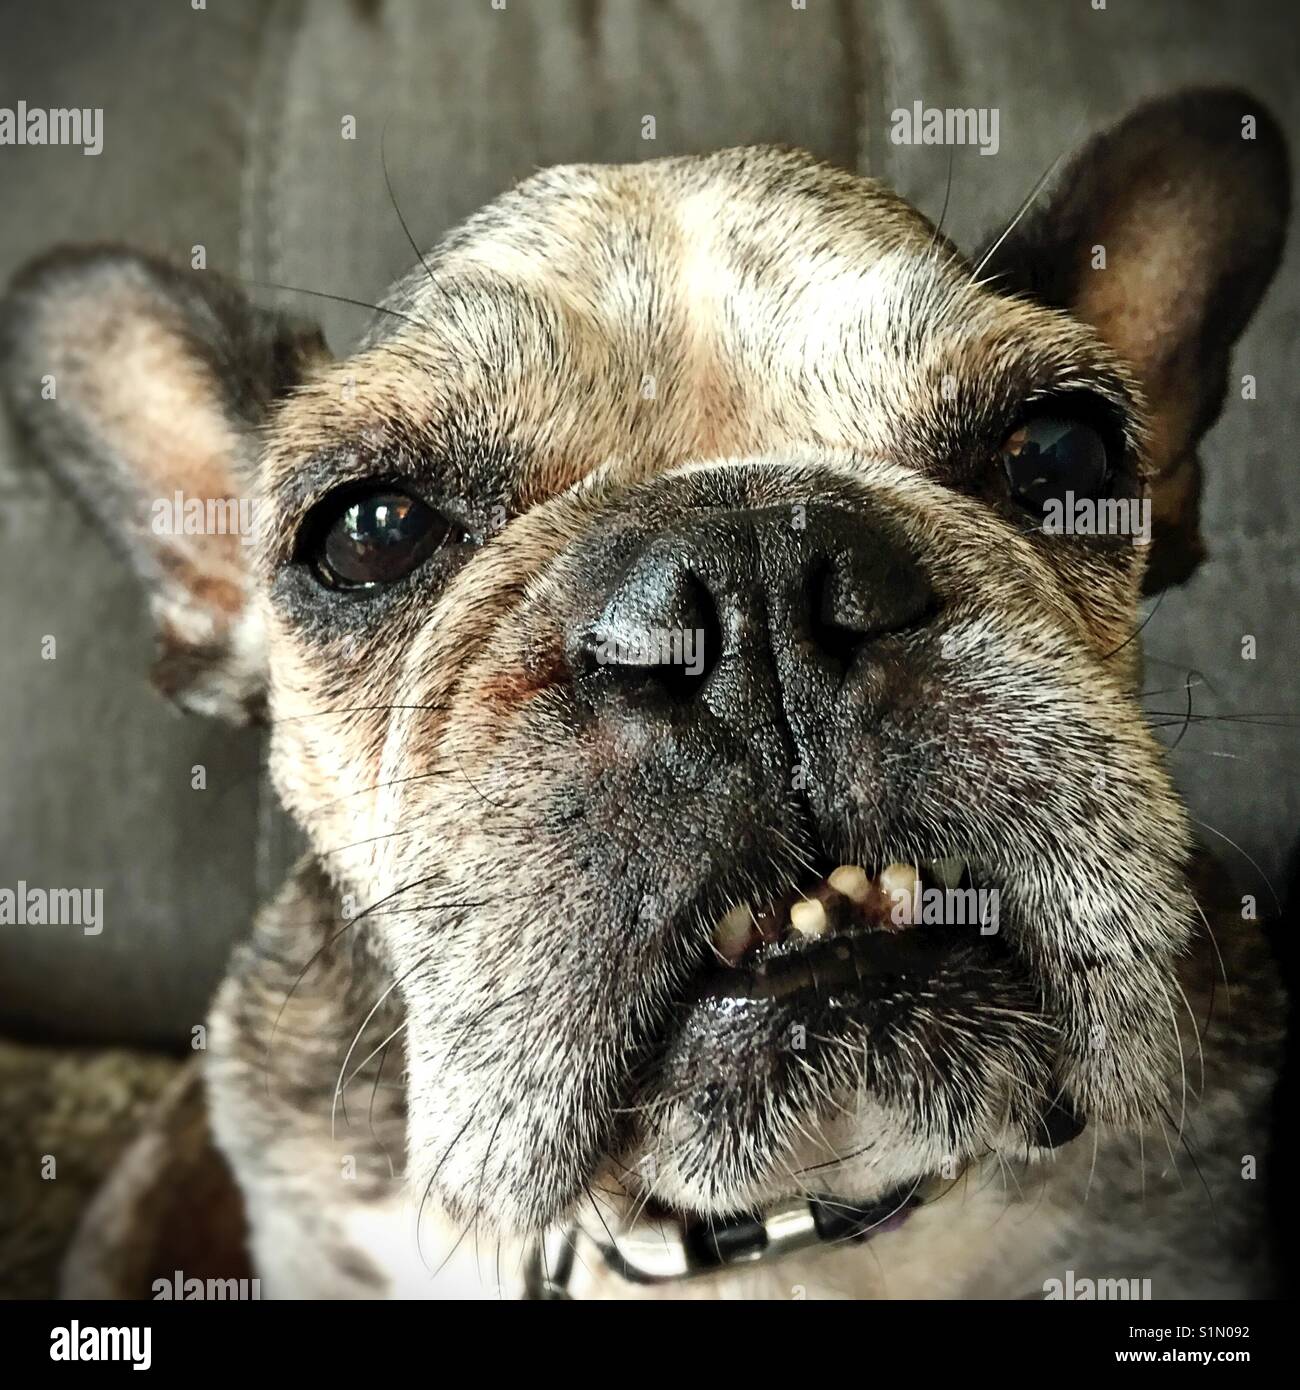 Close-up of the face of an old French bulldog. Stock Photo